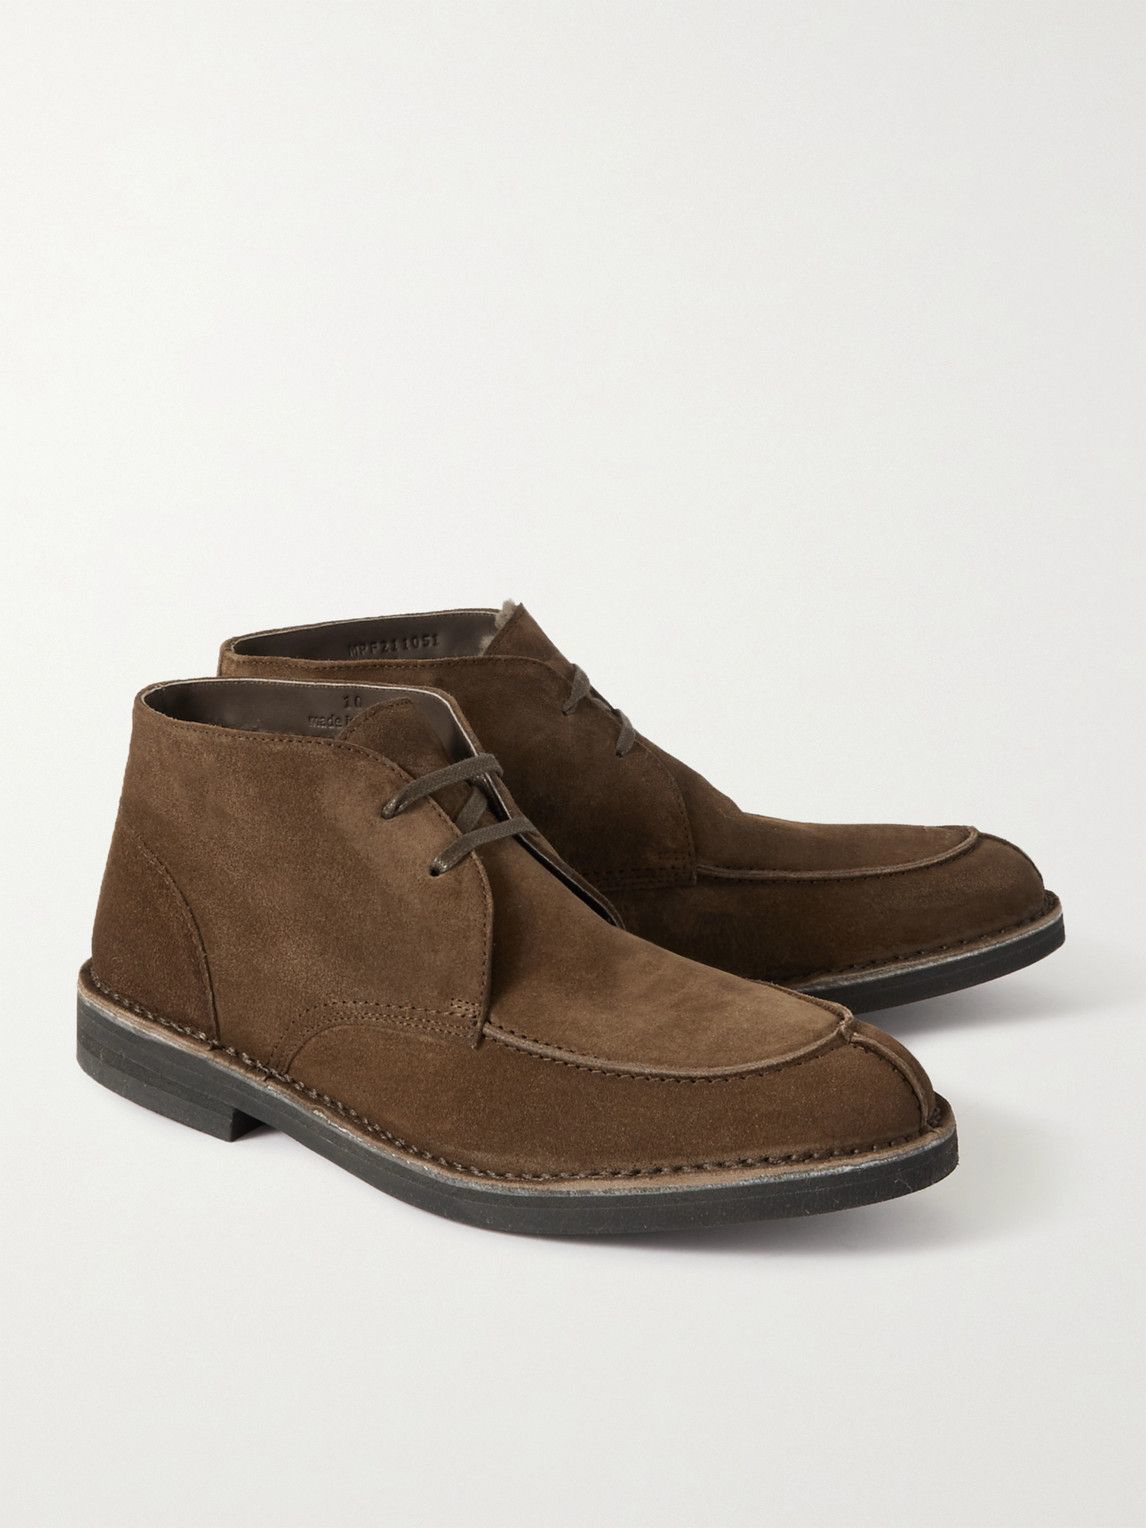 MR P. Larry Split-Toe Regenerated Suede by evolo® Chukka Boots for Men